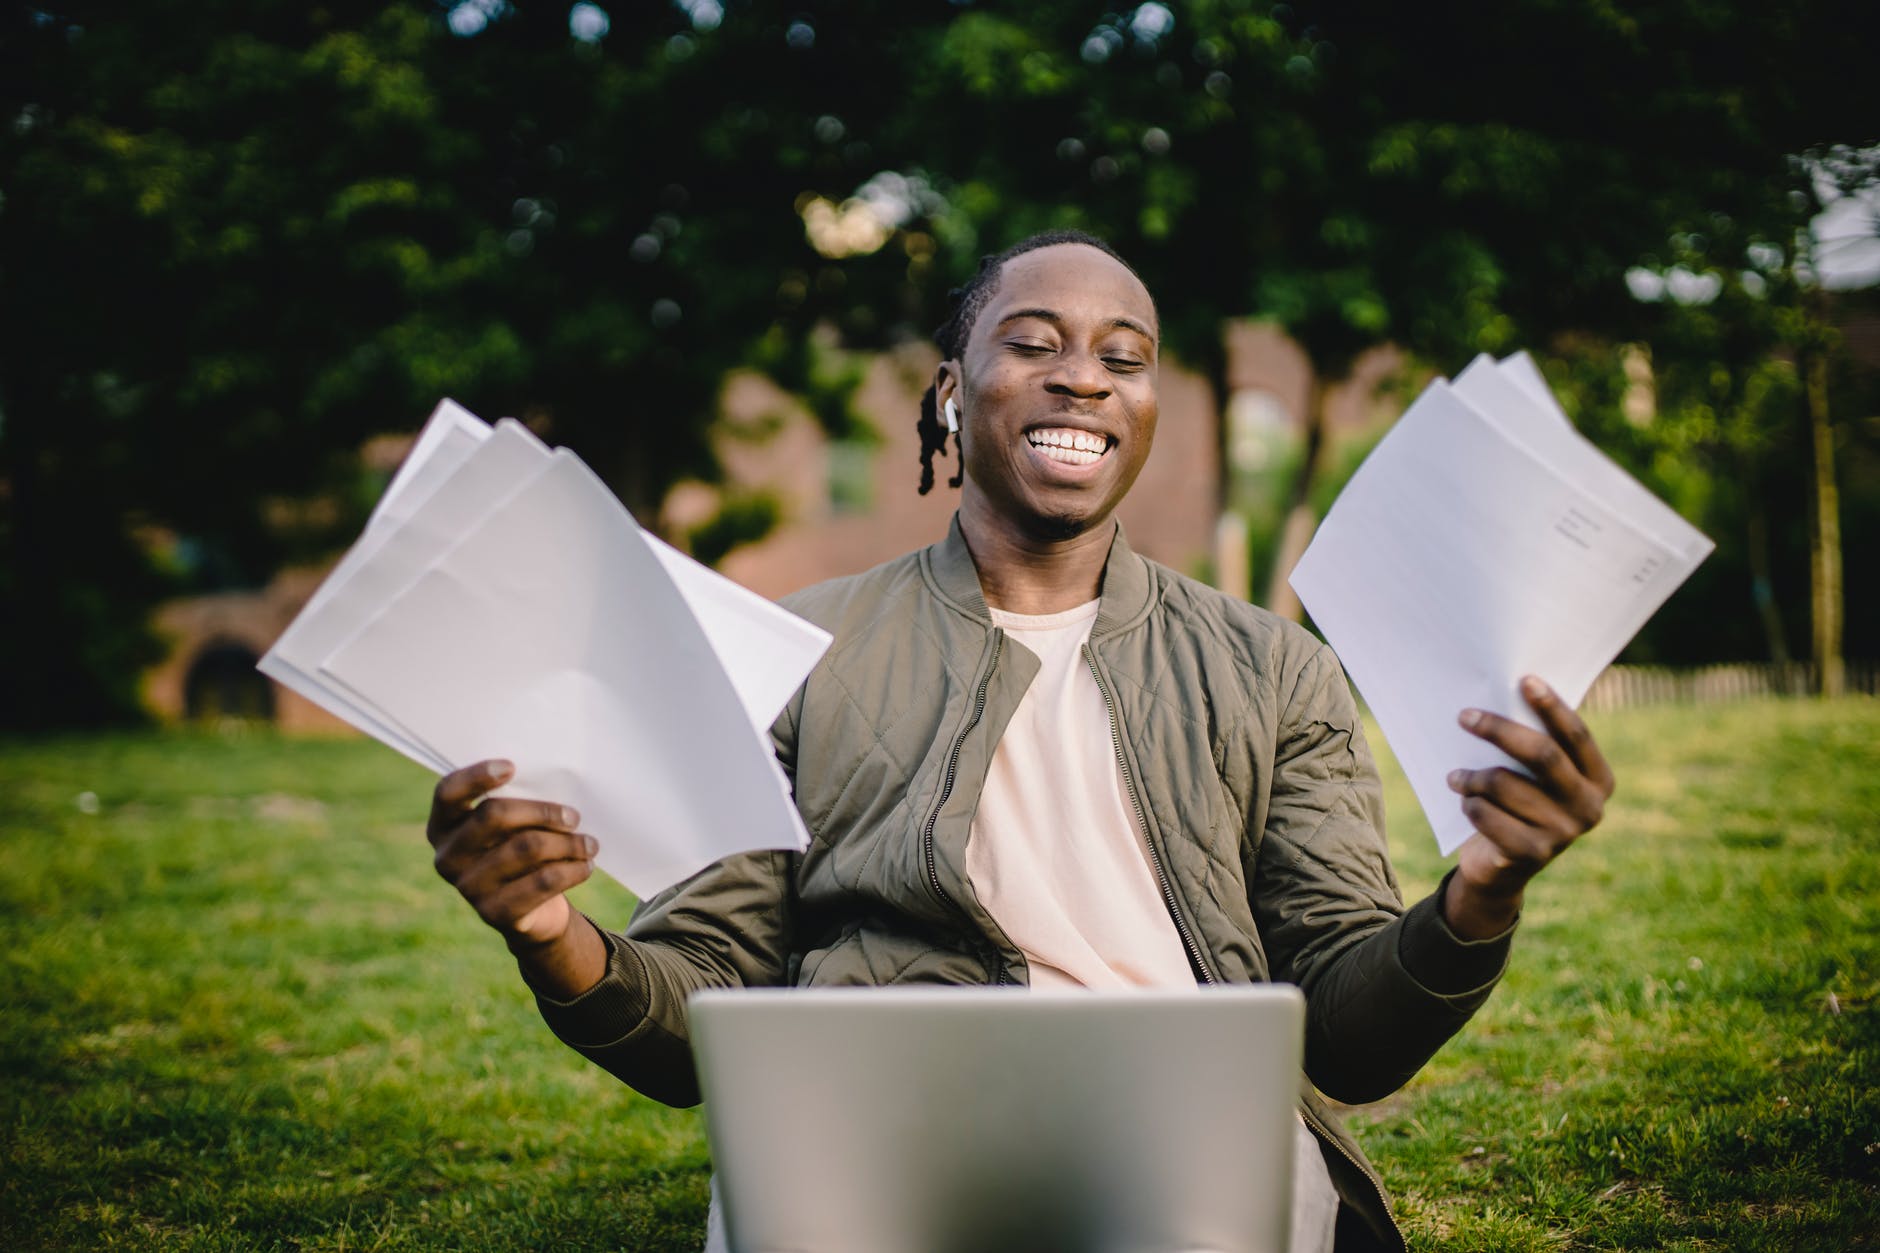 Smiling man looking at laptop and holding sheets of paper